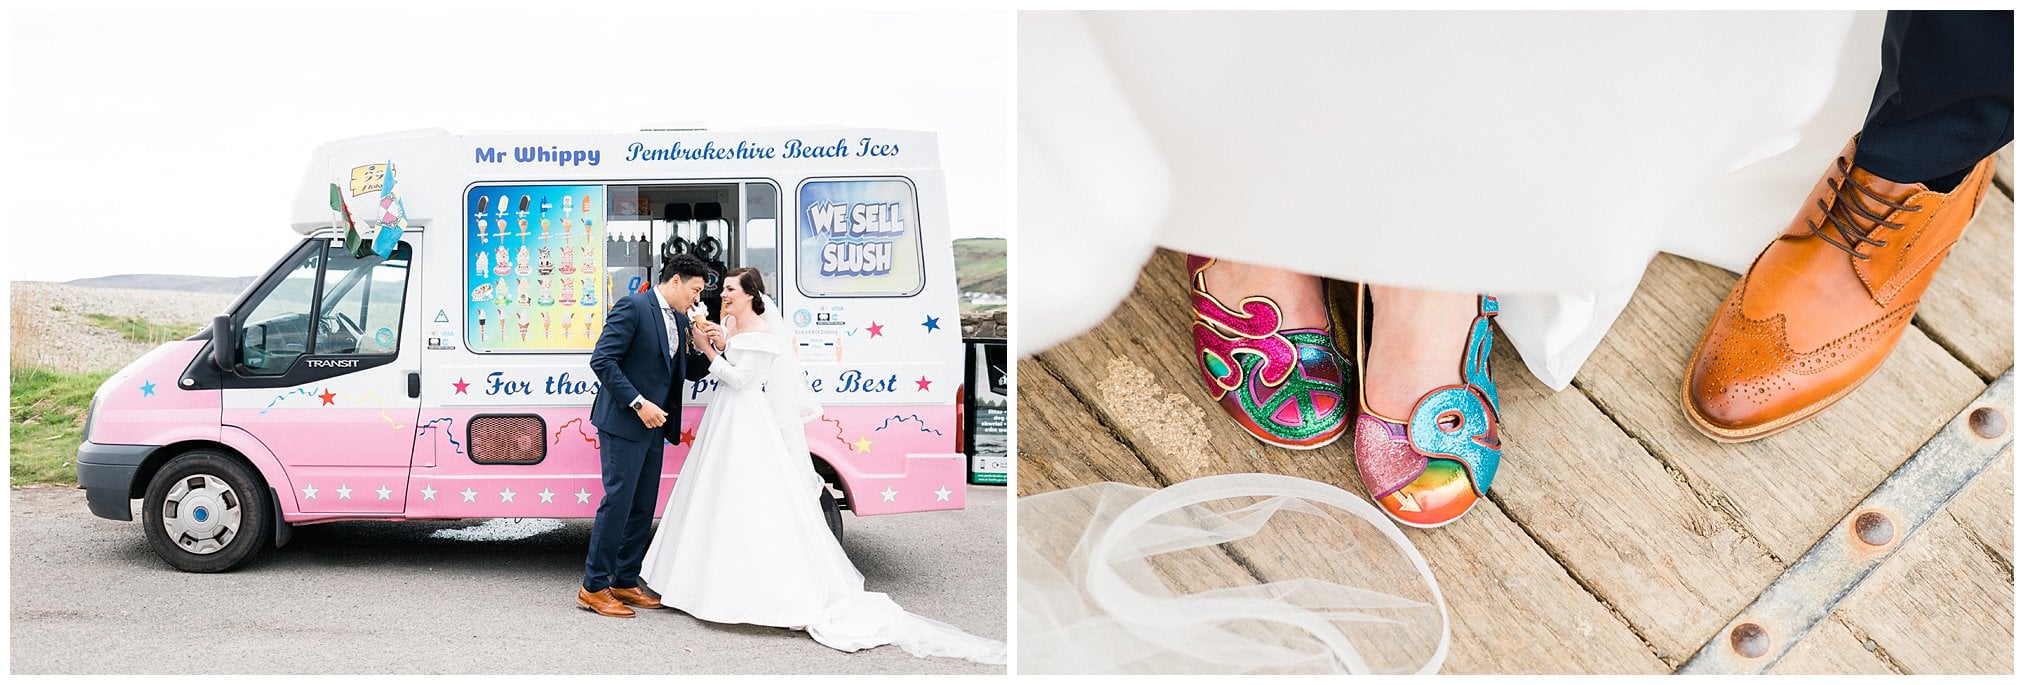 Bride and Groom share an ice cream. Wedding shoes.